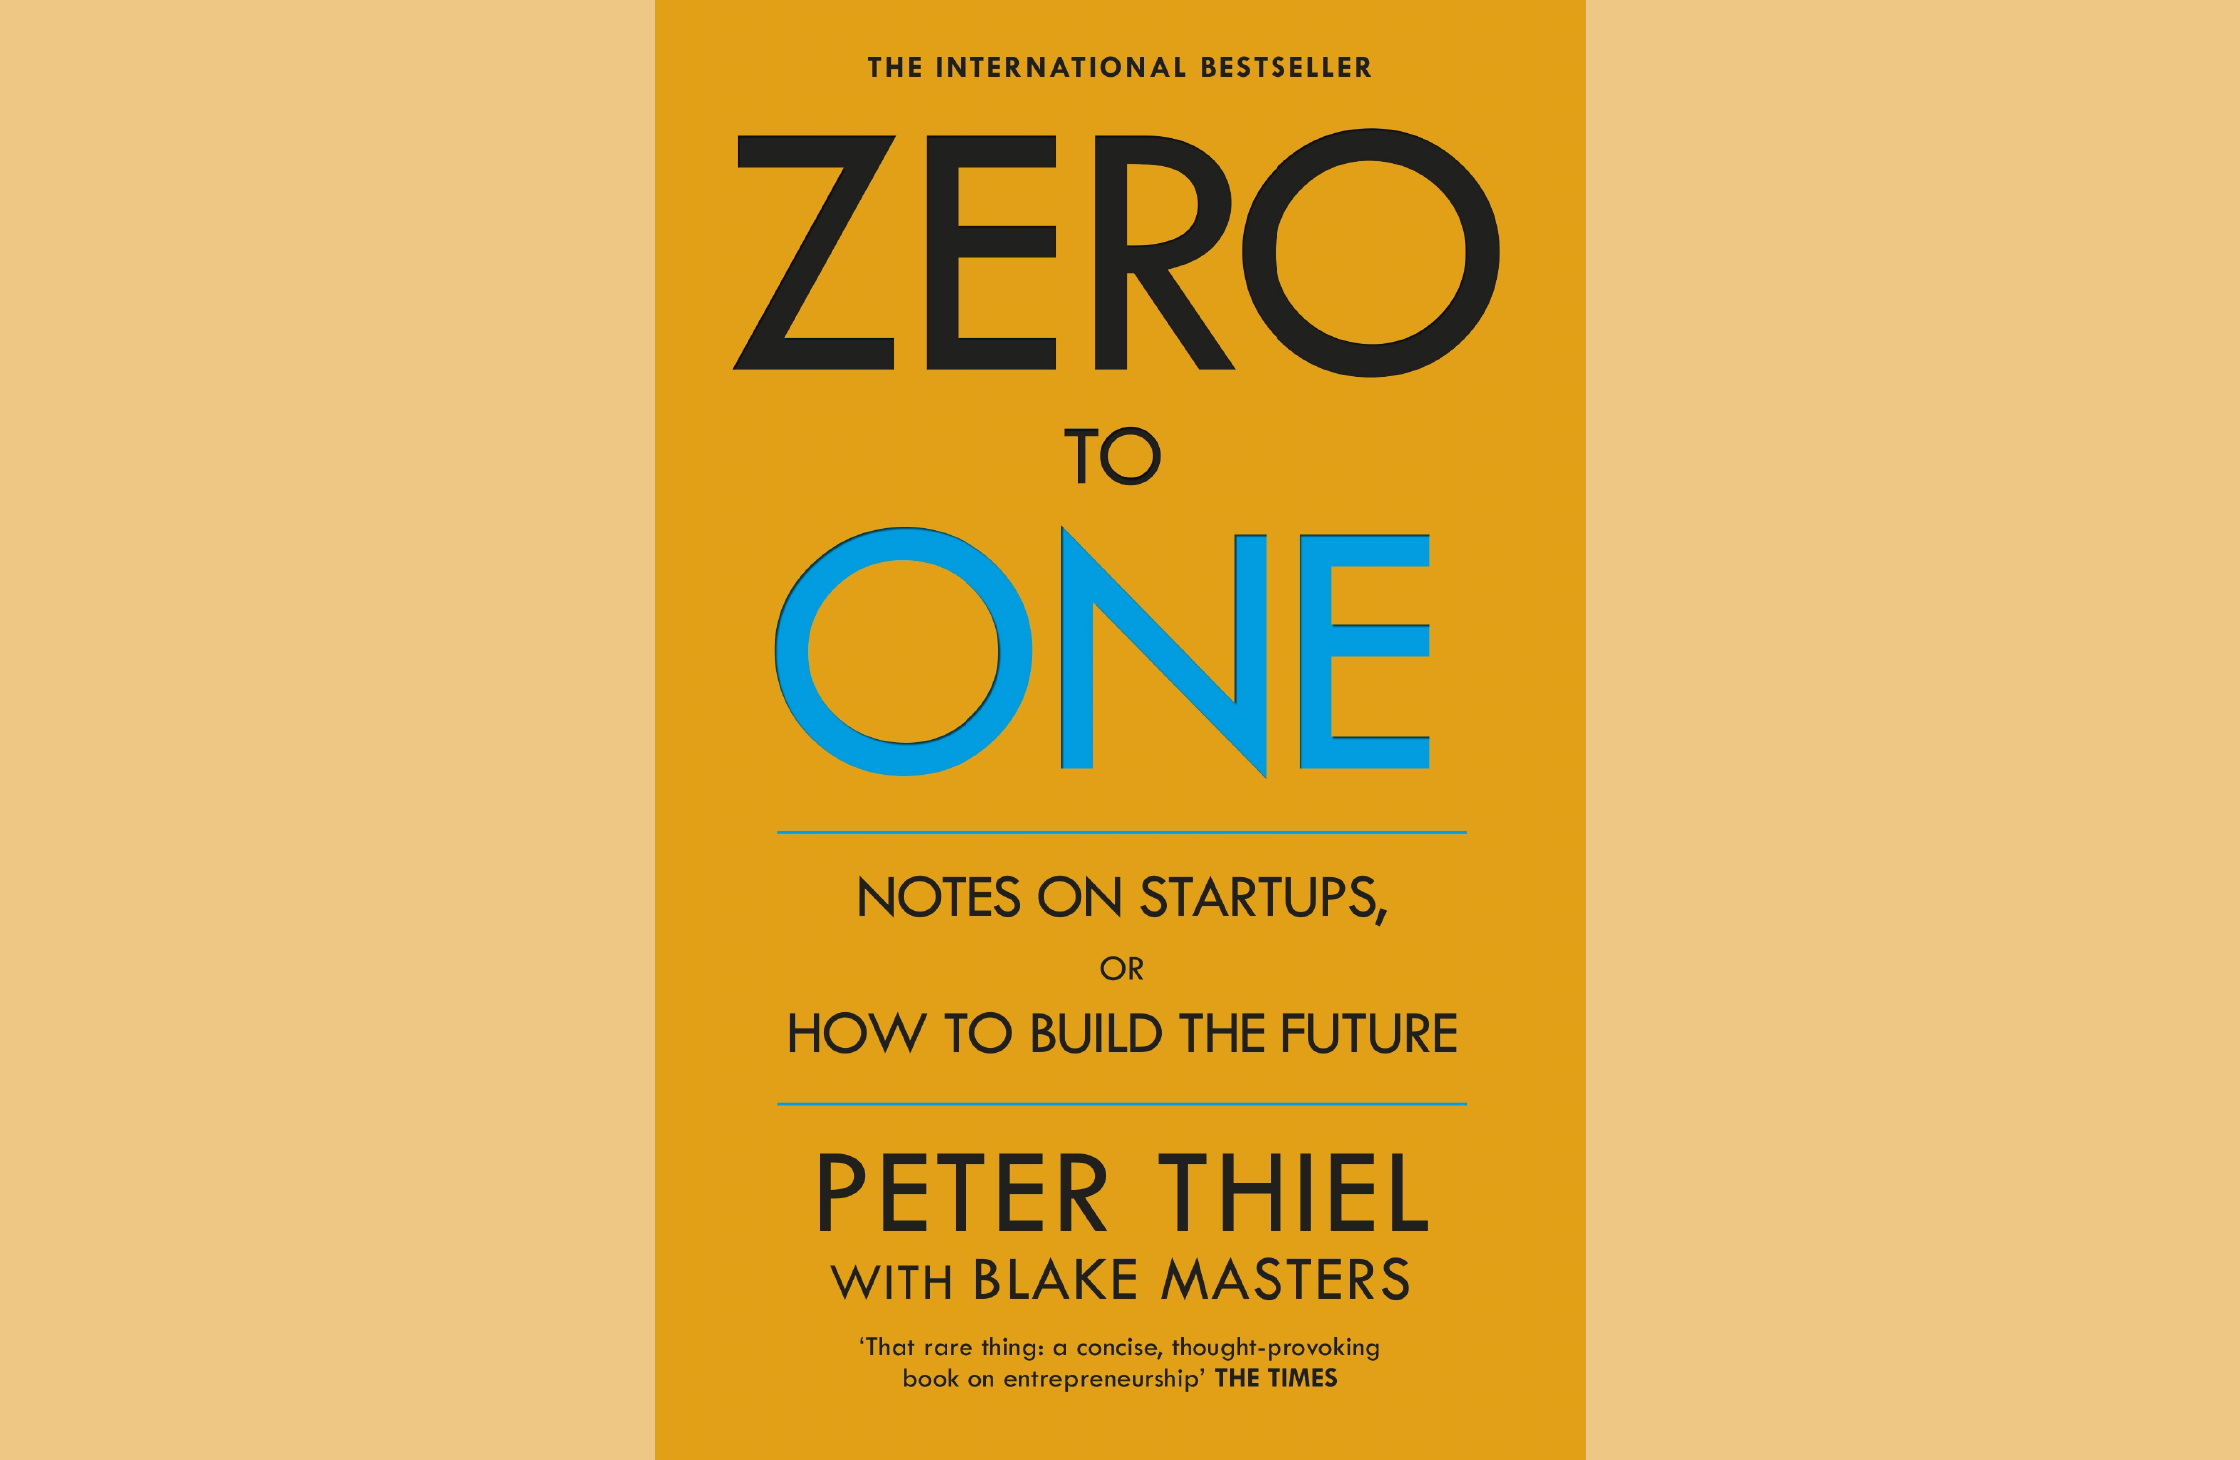 Summary: Zero to One by Peter Thiel